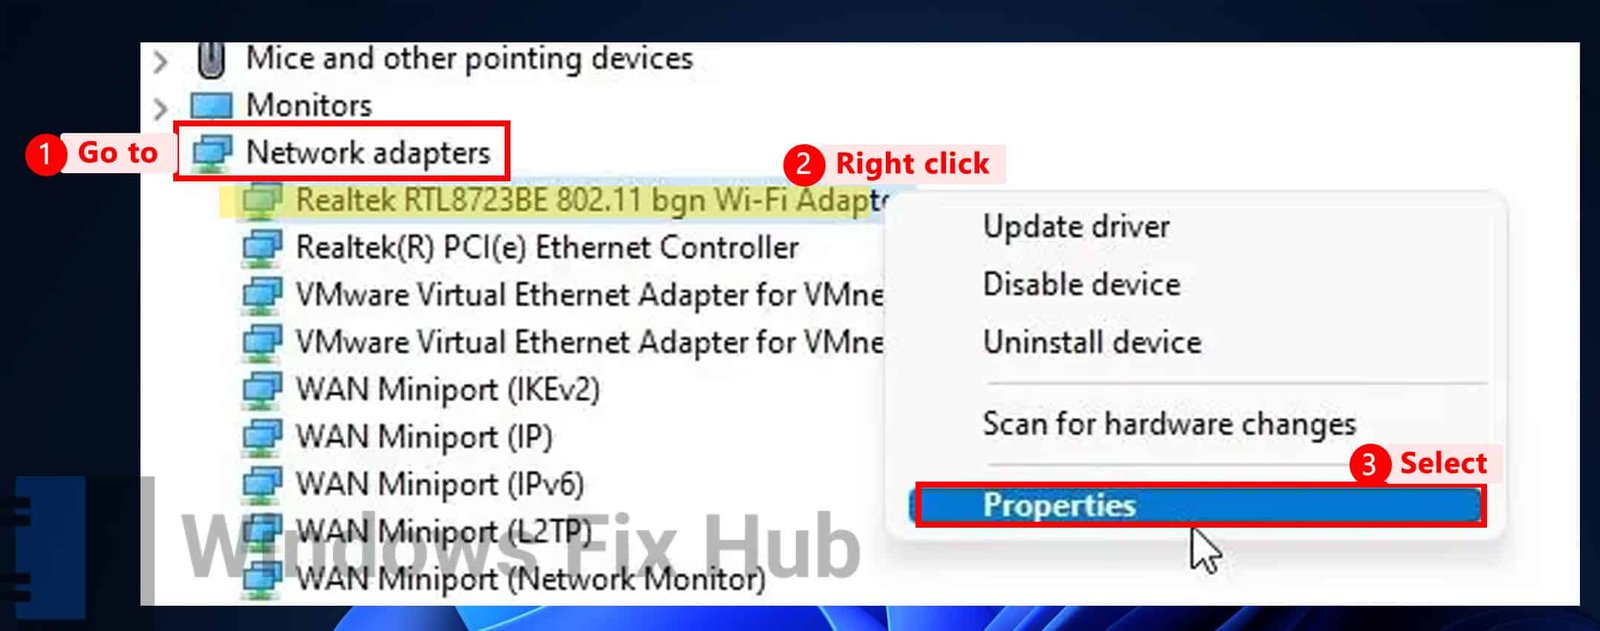 Click Properties for Network adapters